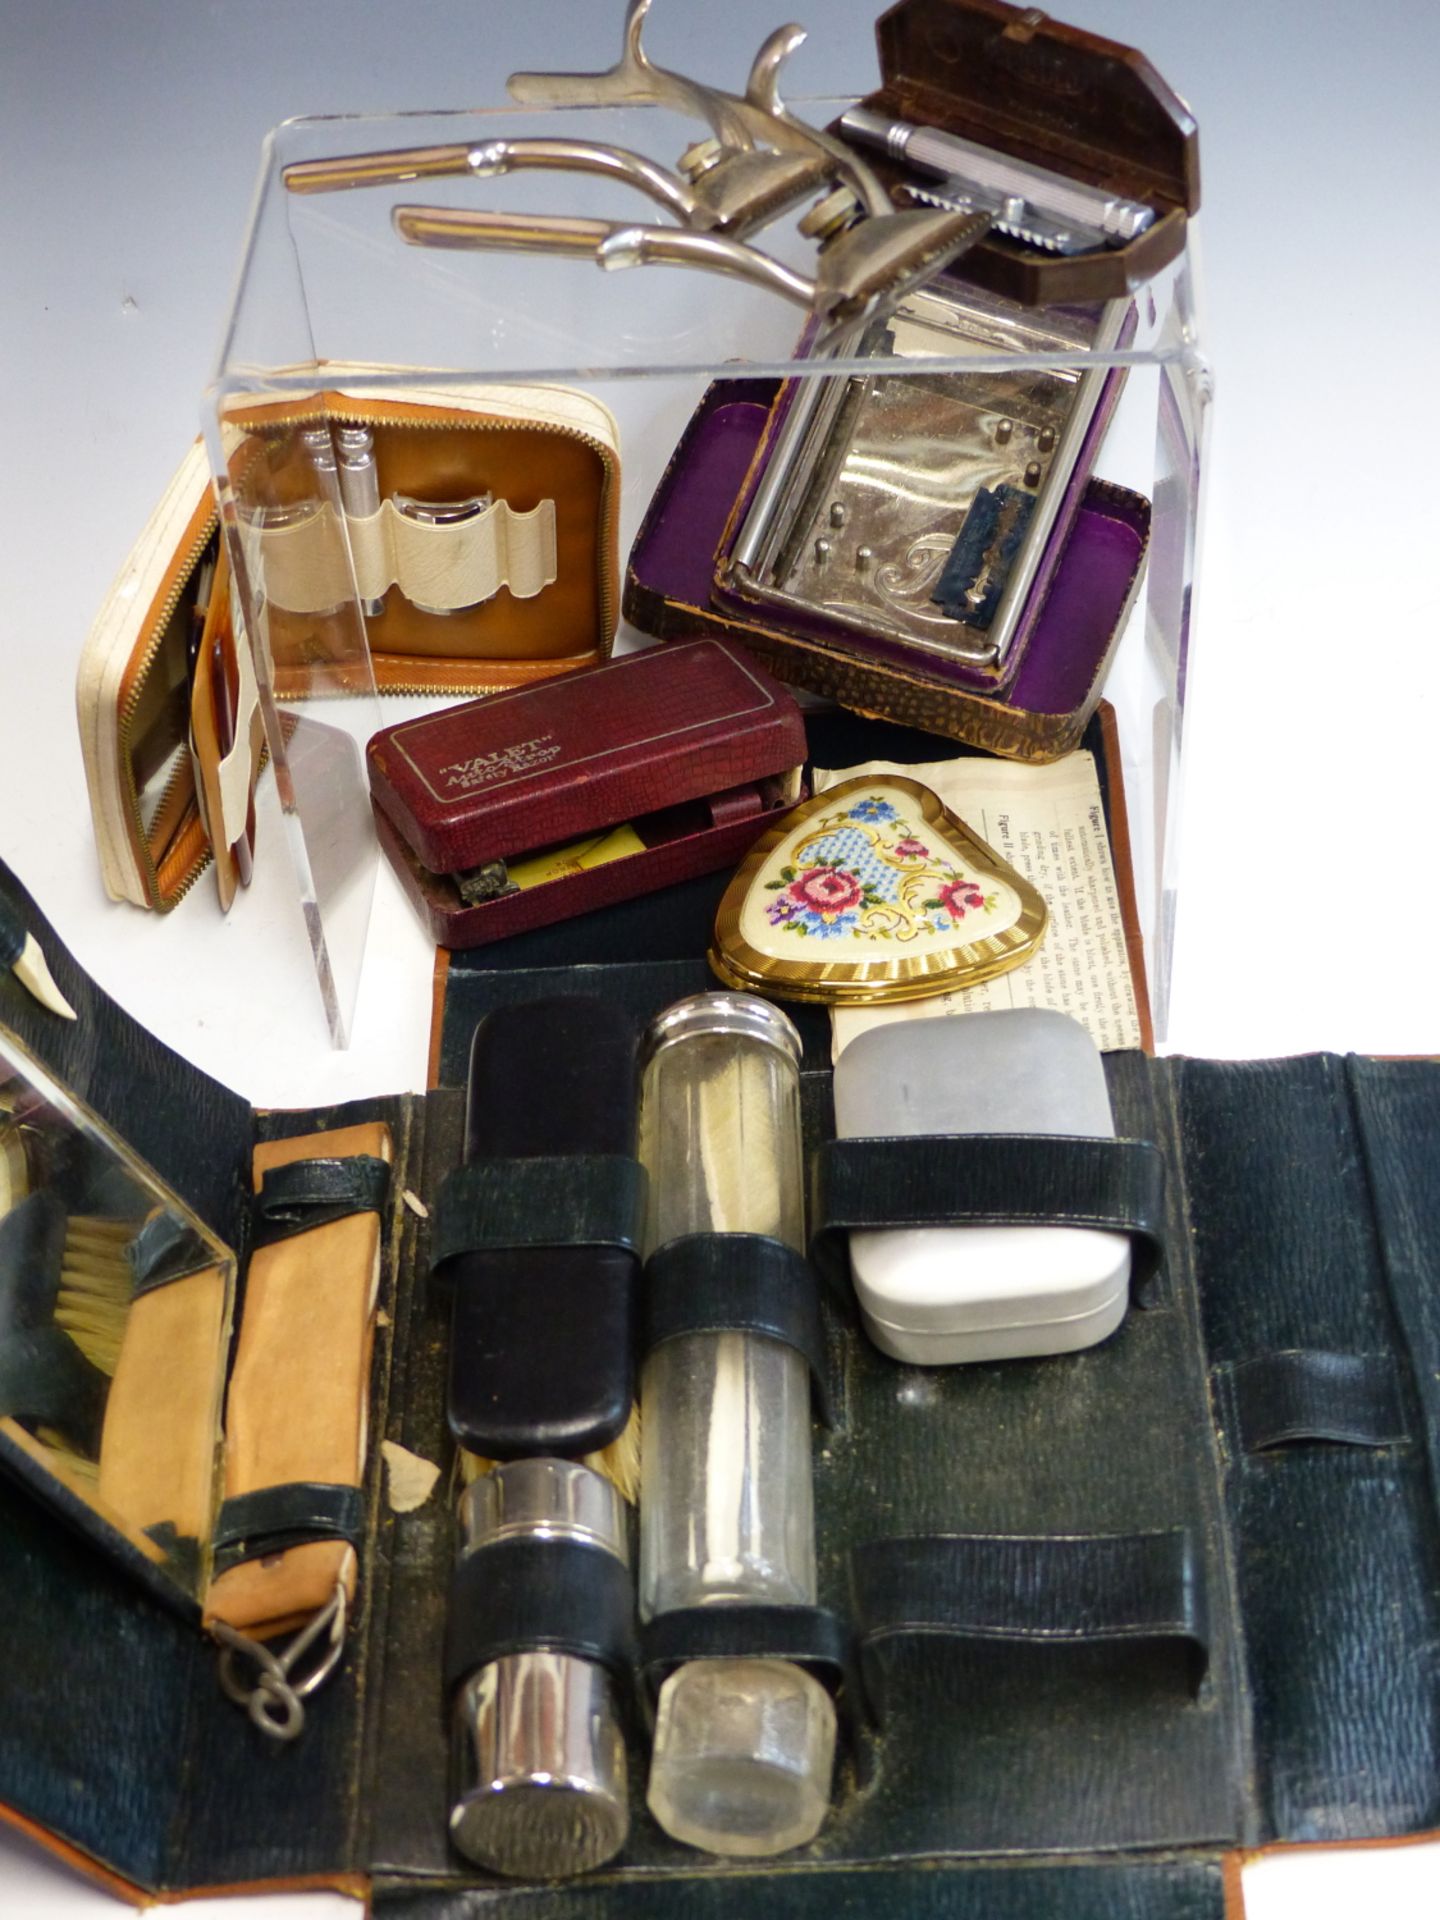 A GROUP OF VINTAGE RAZORS AND SHAVING IMPLEMENTS AND A GENTLEMAN'S VANITY CASE.